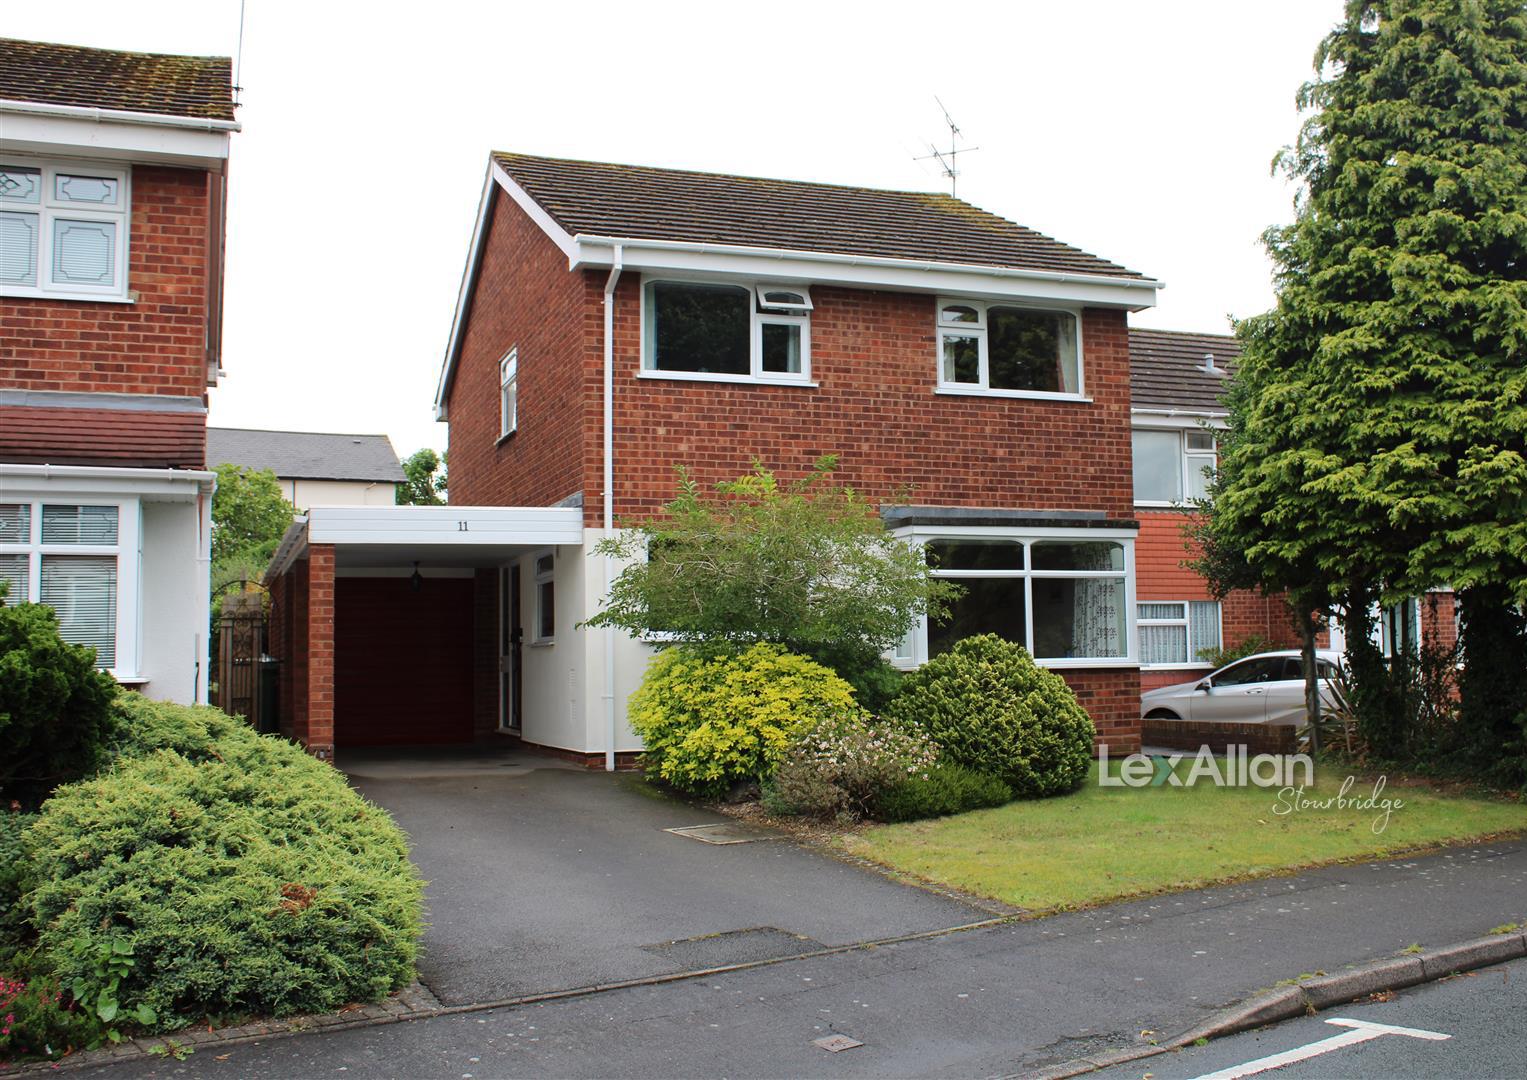 4 bed detached house for sale in Ibstock Drive, Stourbridge - Property Image 1